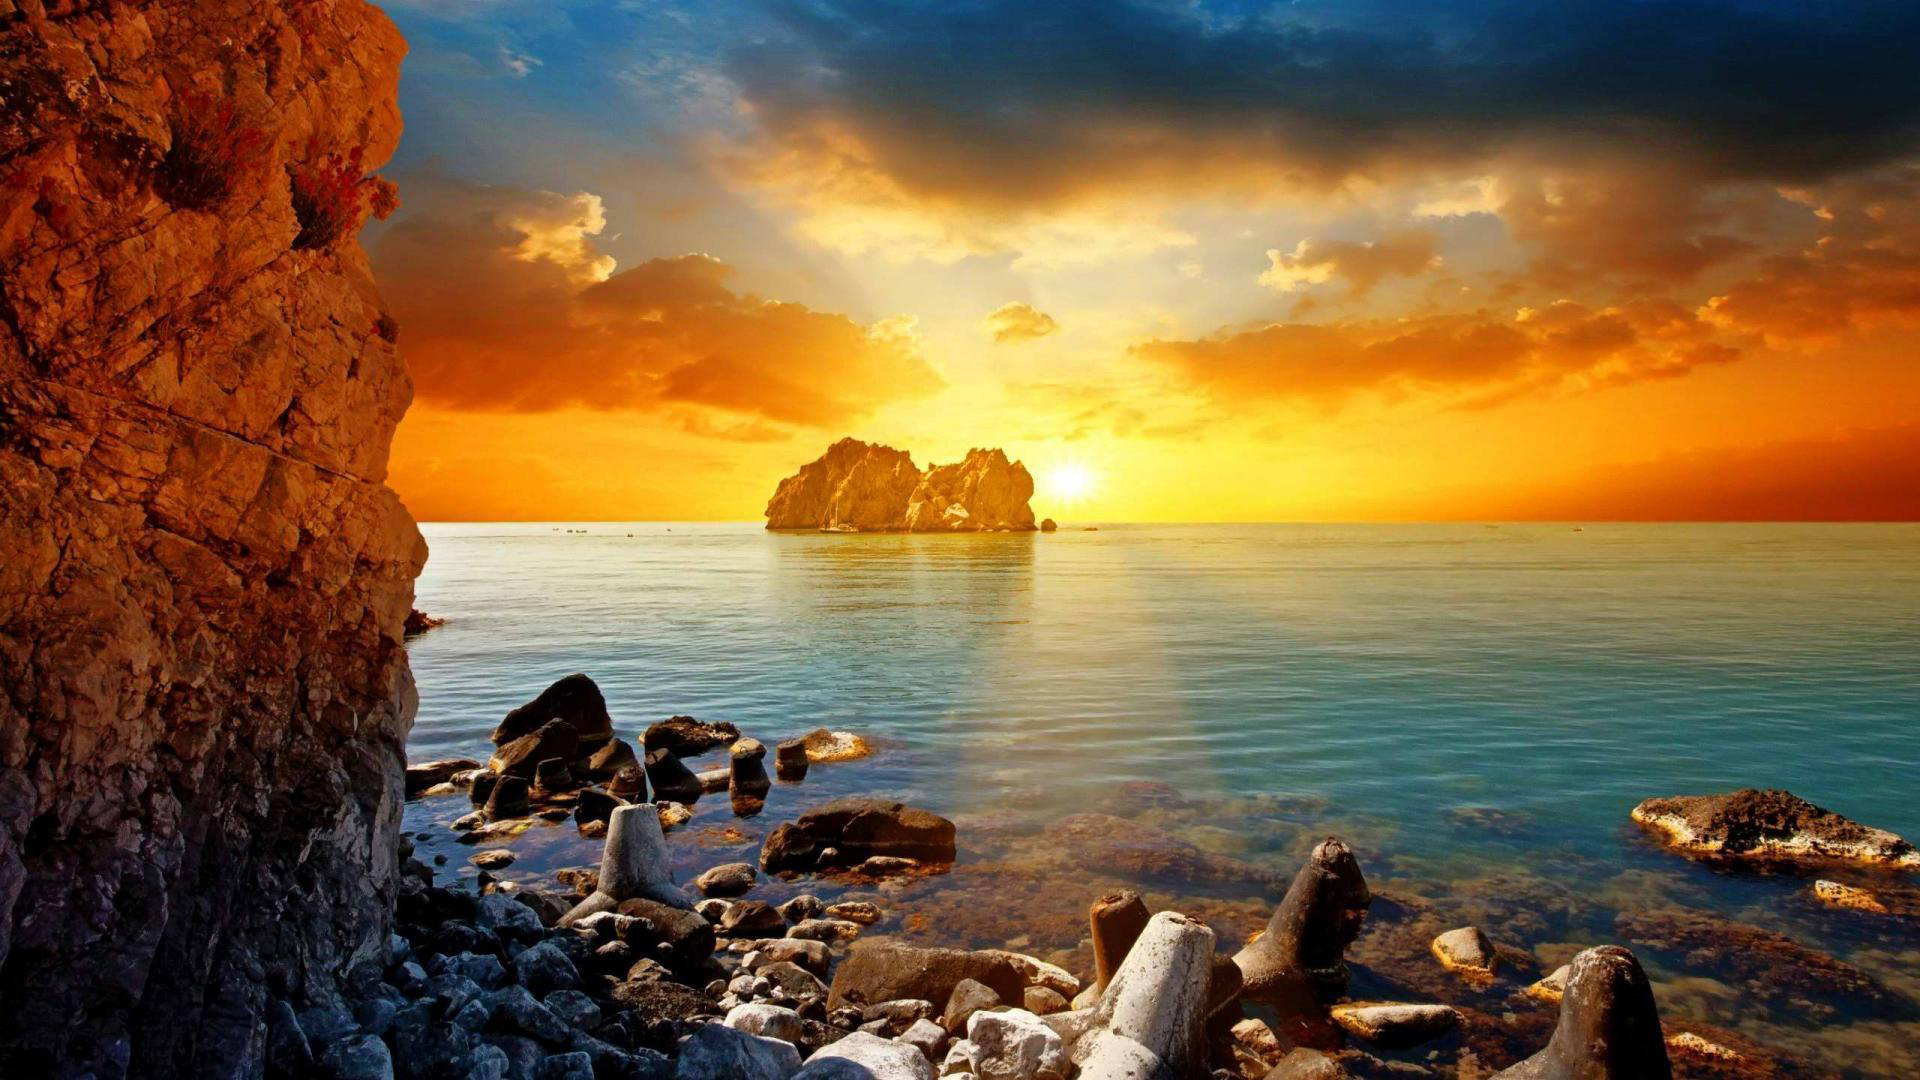 Sea And Rocks Under Cloudy Sky With Yellow Sunset HD Sunset